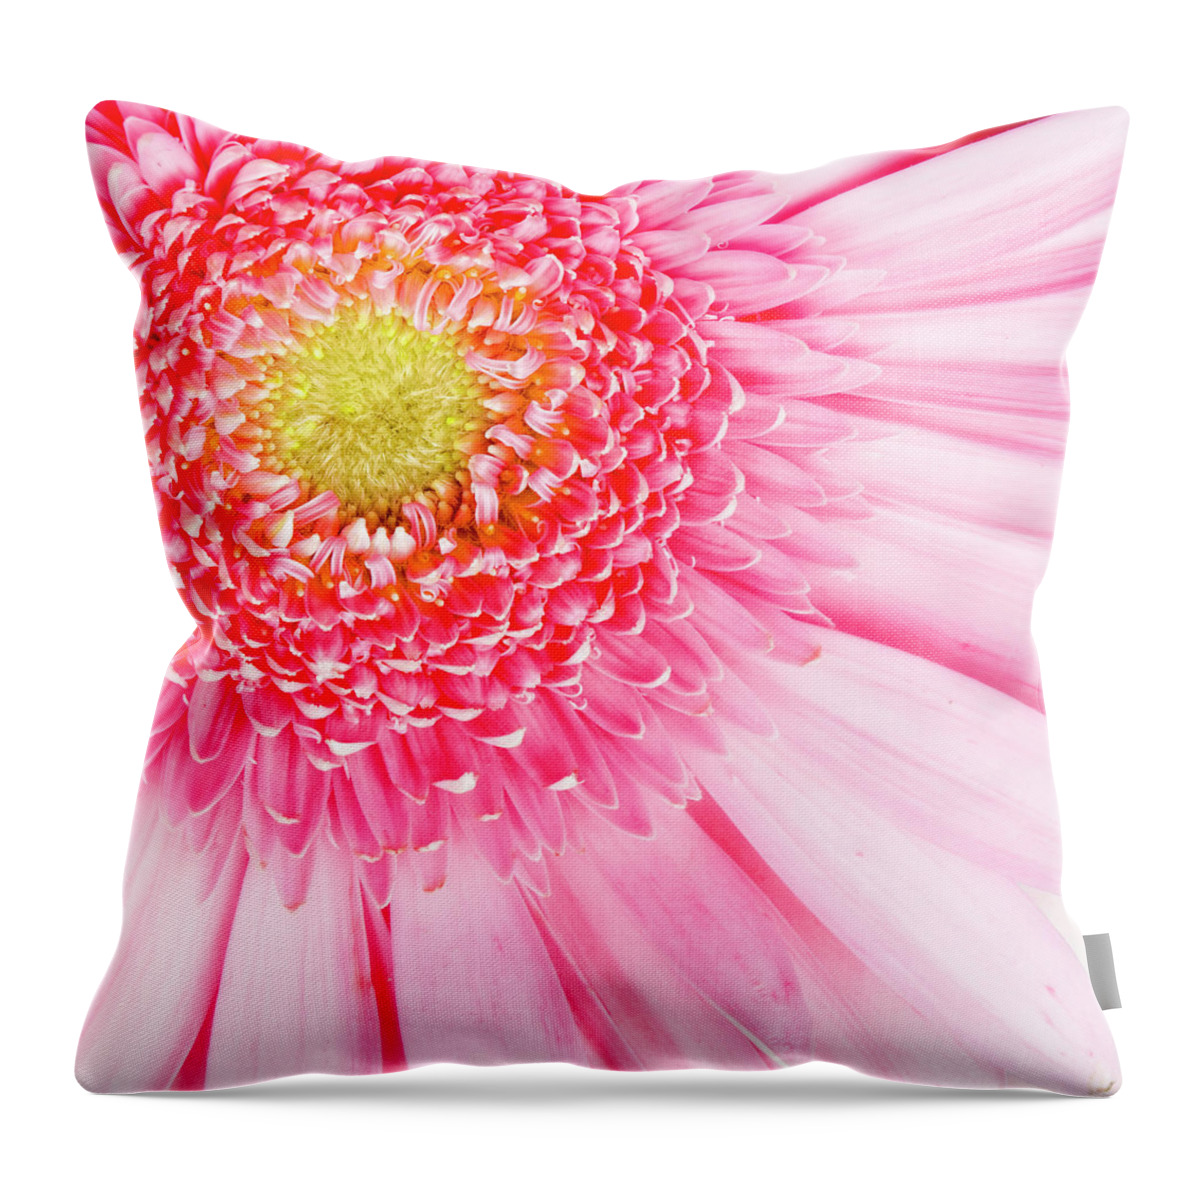 Pink Throw Pillow featuring the photograph Pink Delight II by Tamyra Ayles